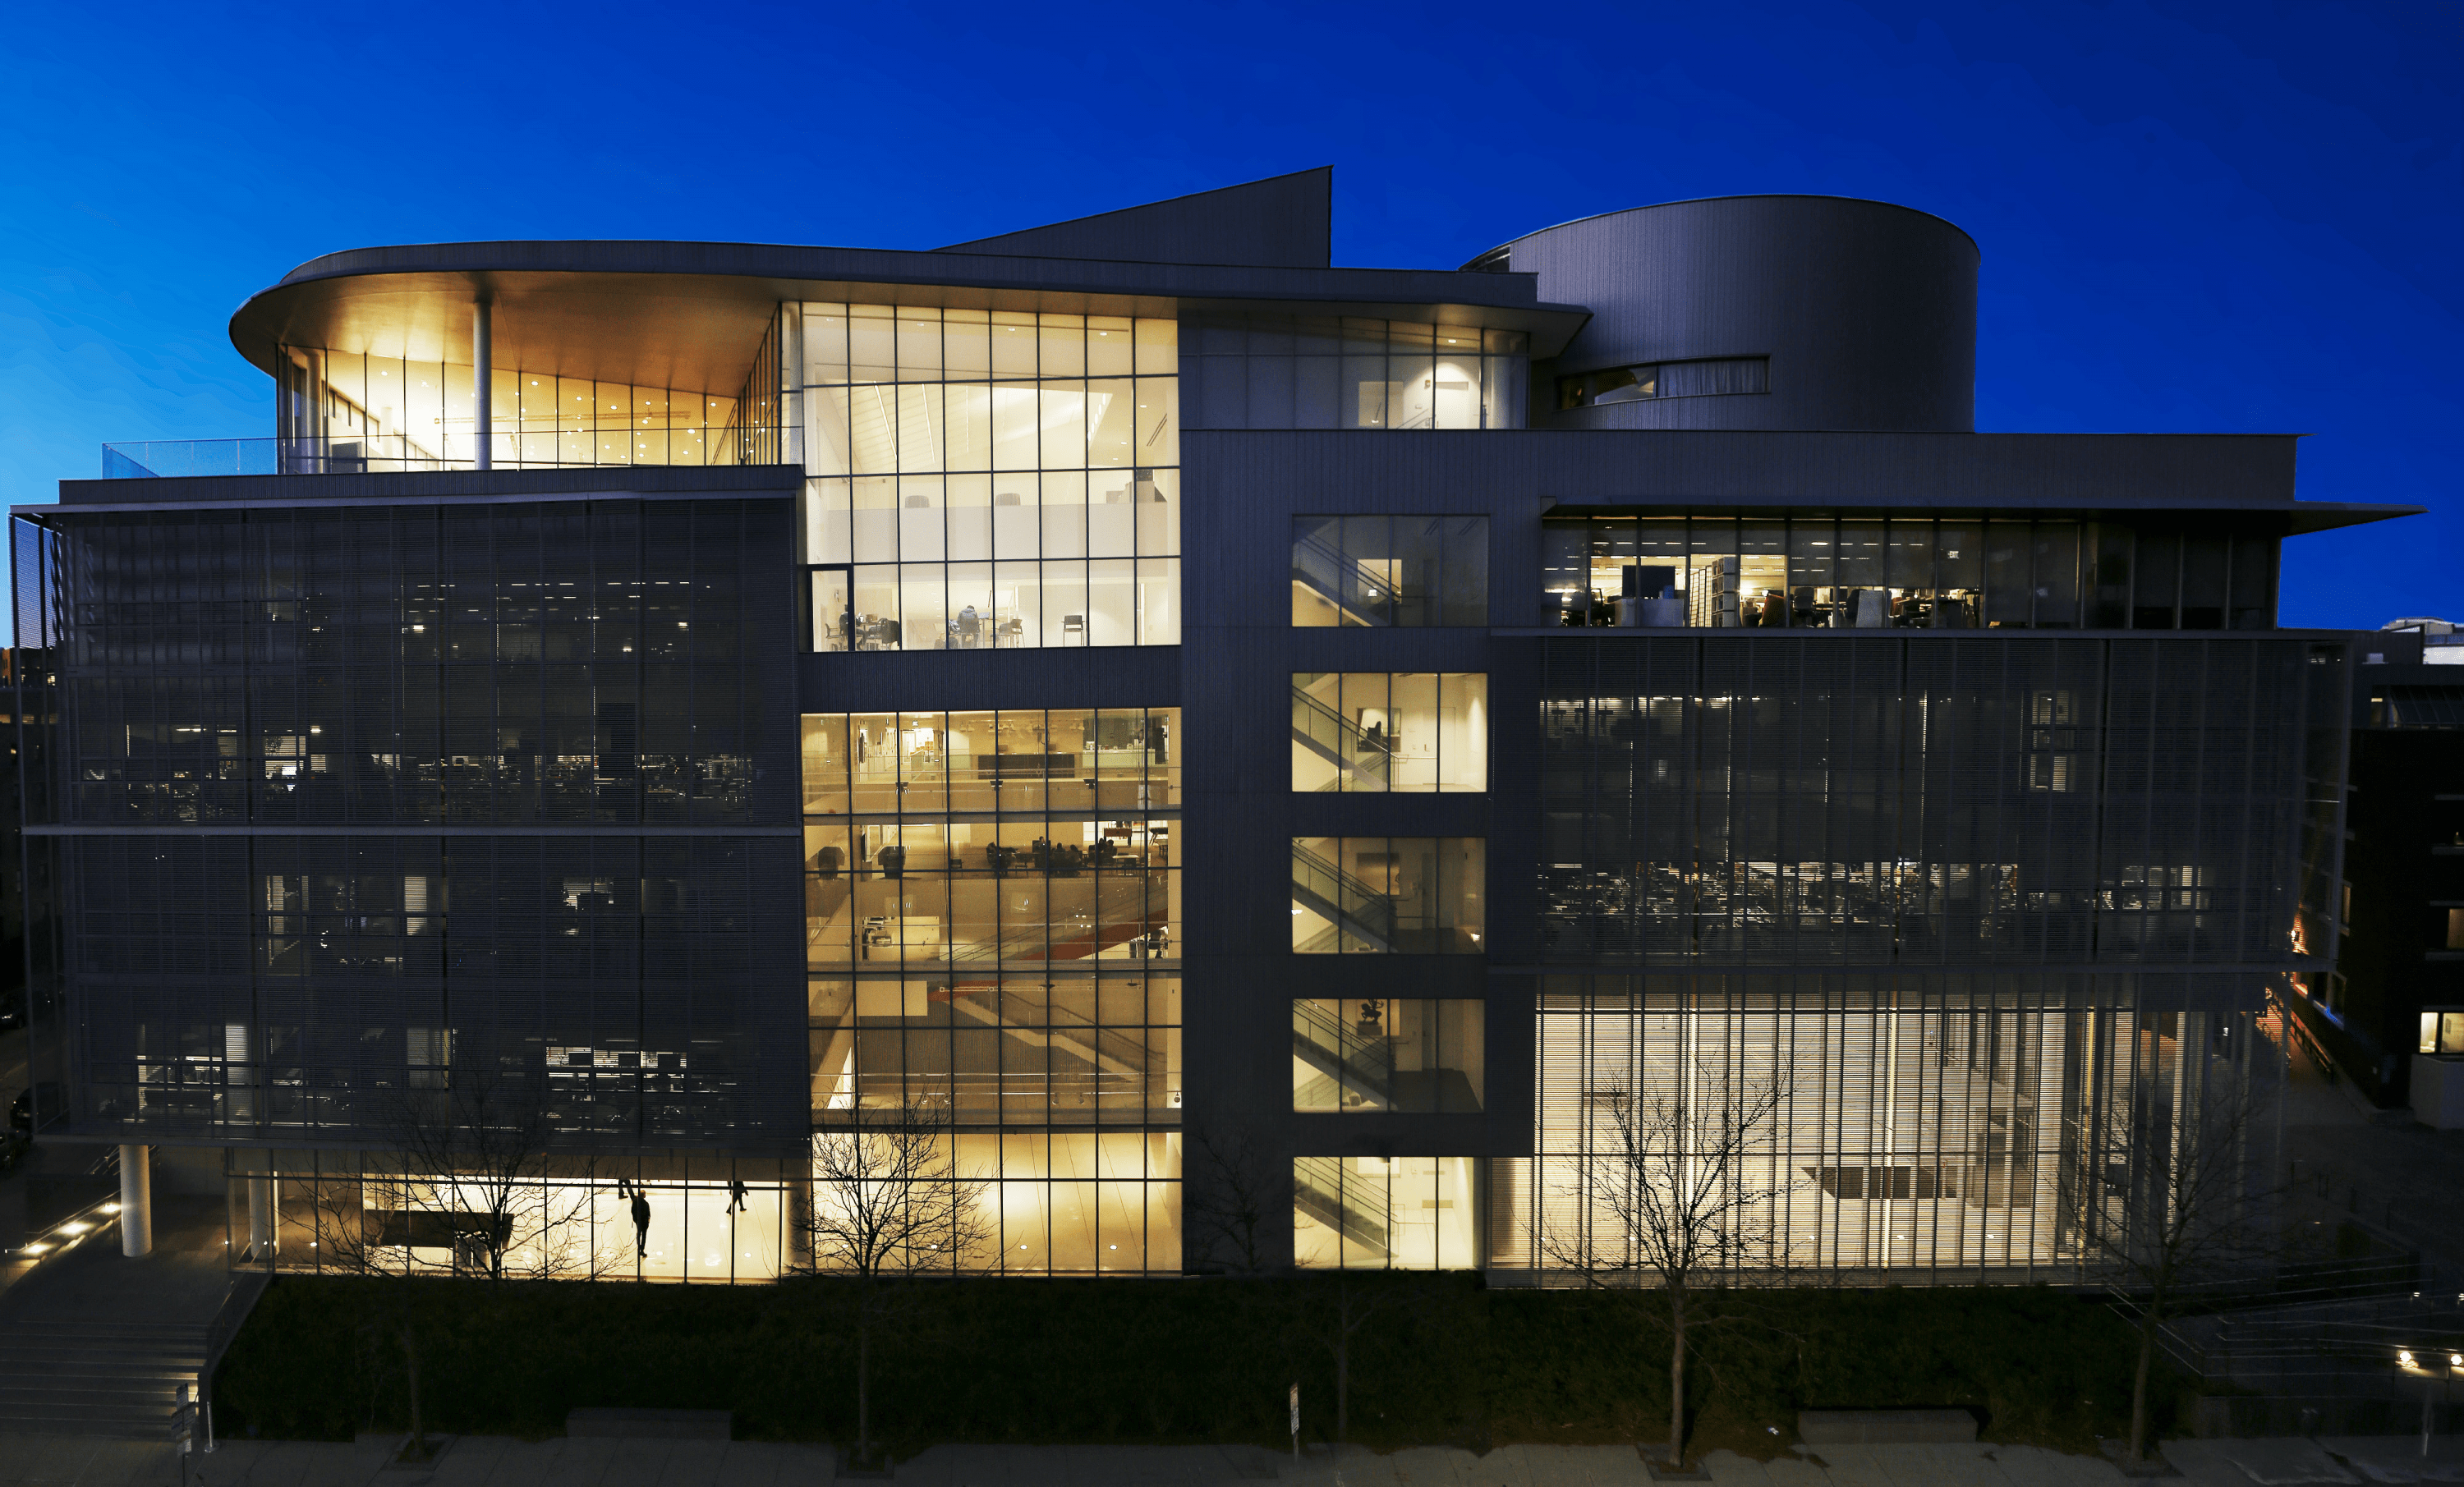 Photo of a contemporary campus building; the glass is illuminated against a night sky.